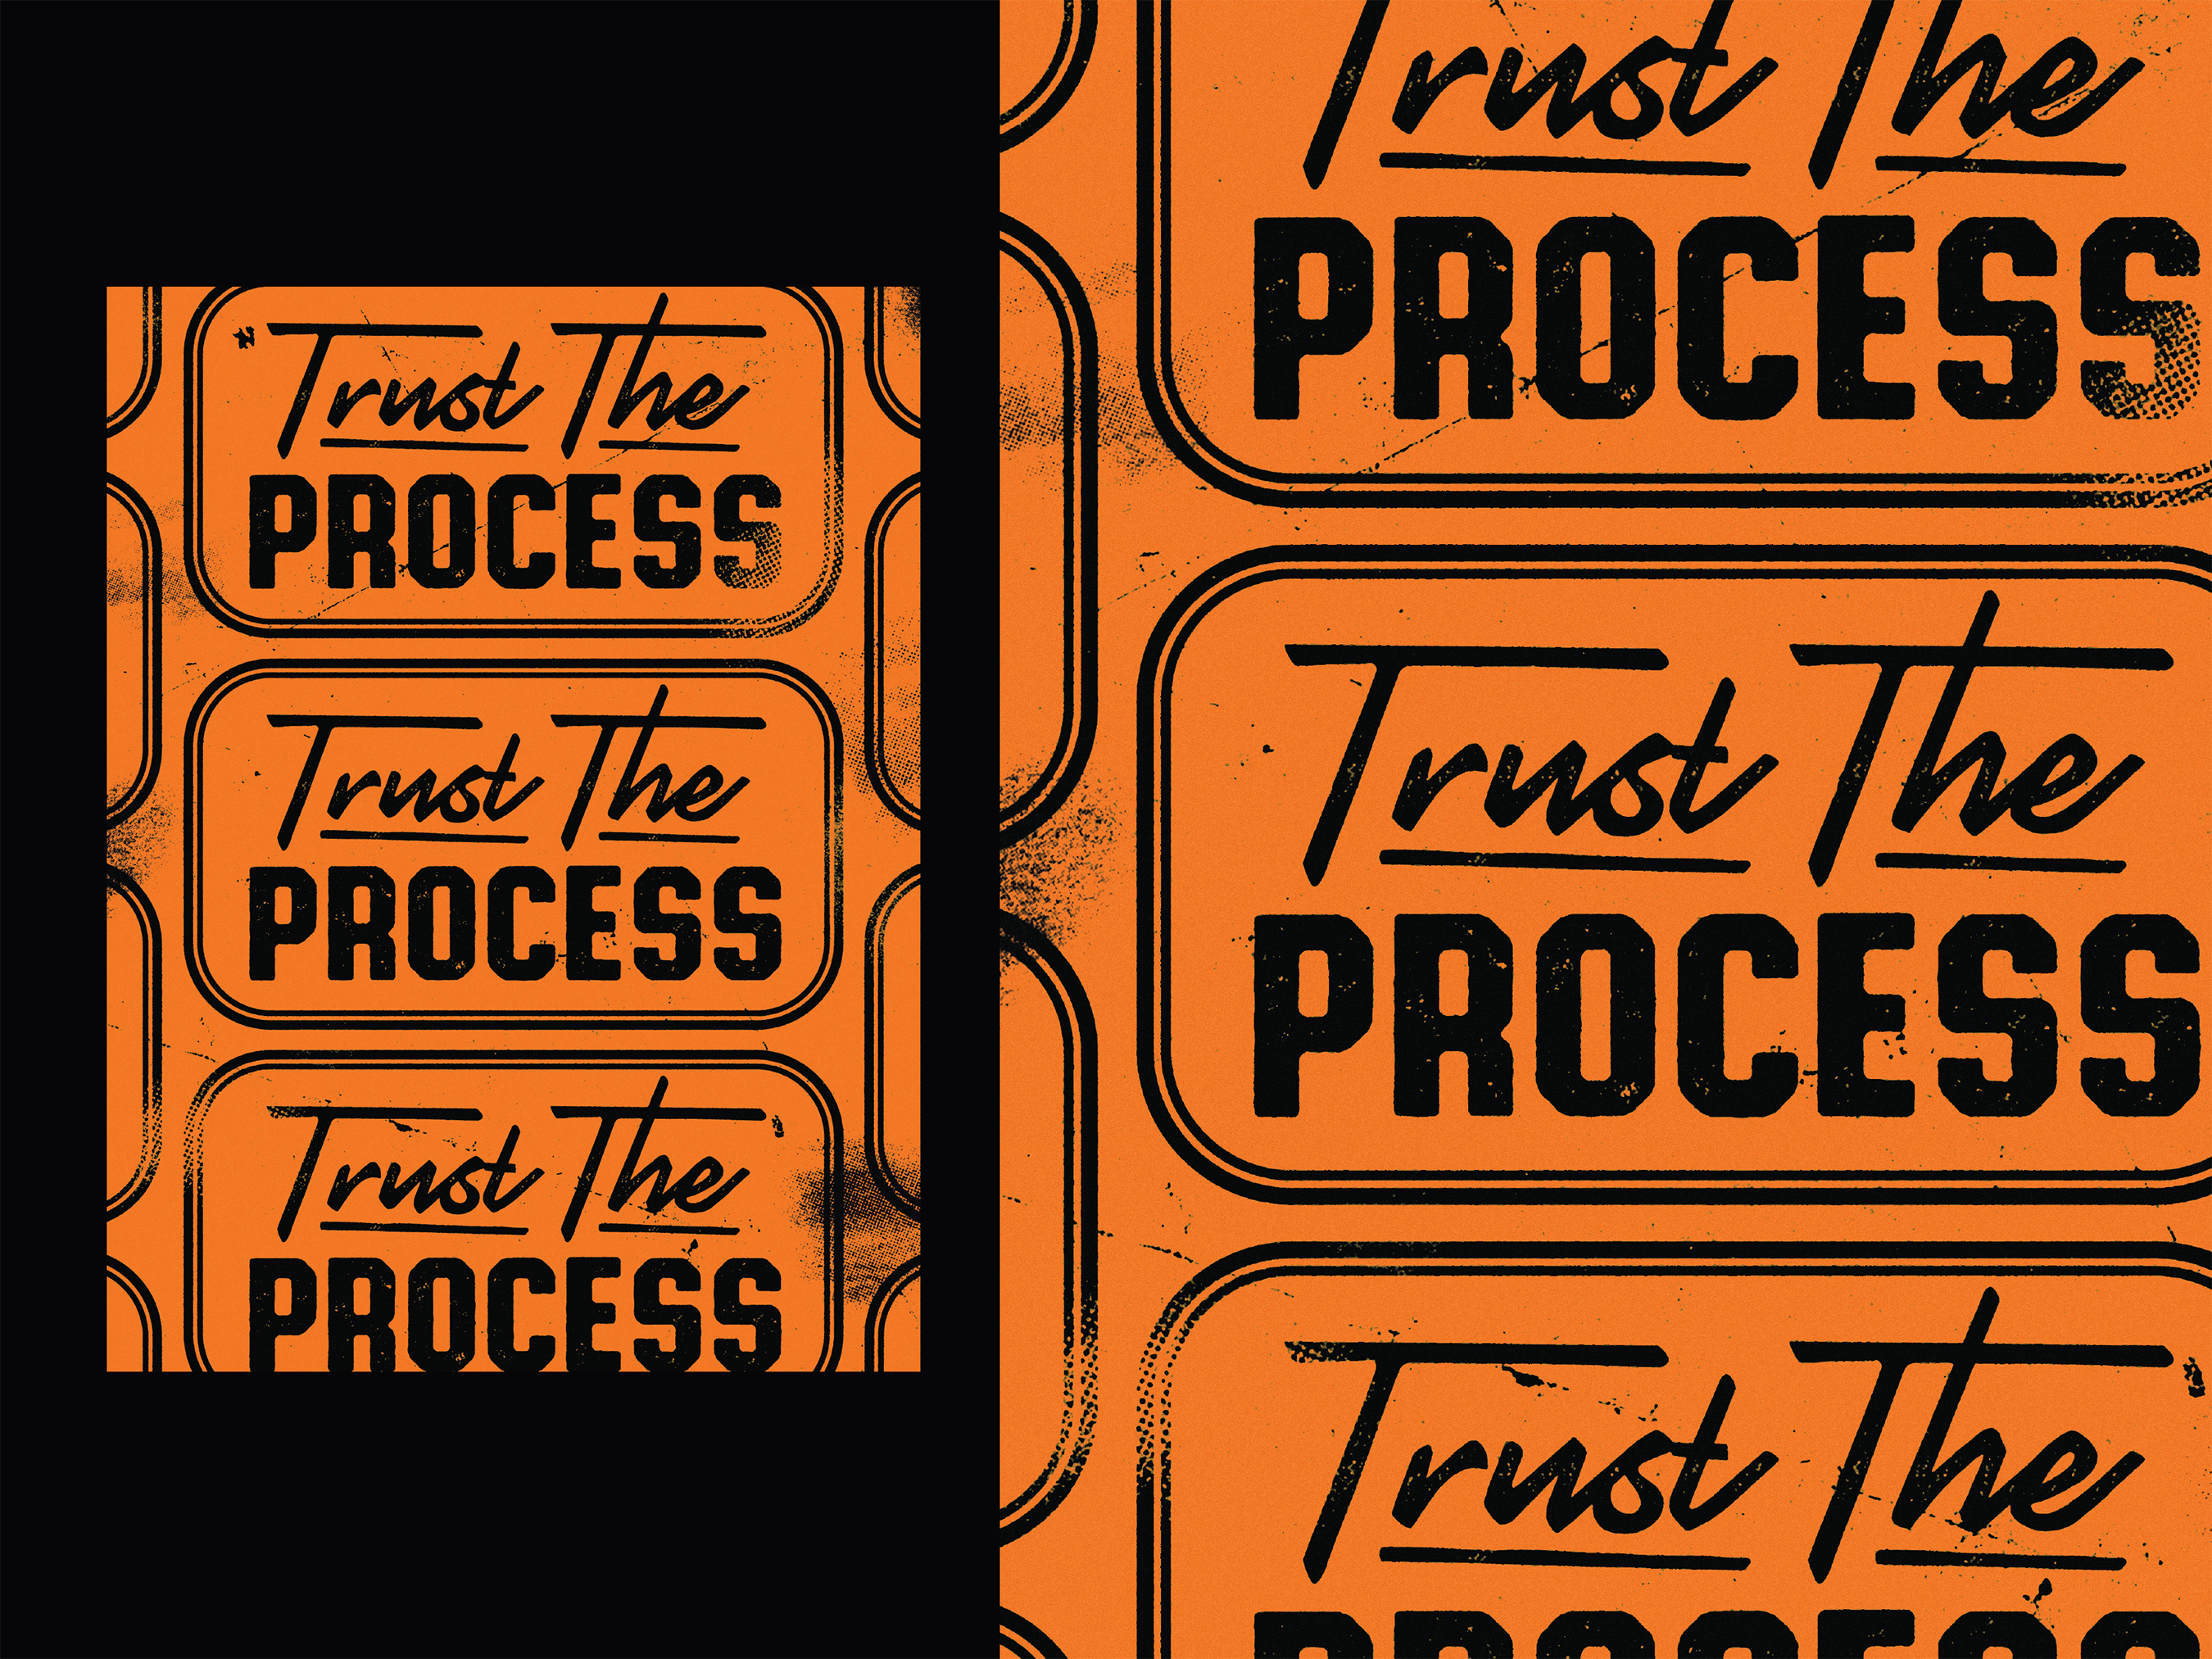 trust the process wall poster Sticker for bedroomlivingroomgymoffice  with waterproof lamination of 12x18 inch without frame Paper Print Paper  Print  Quotes  Motivation posters in India  Buy art film design